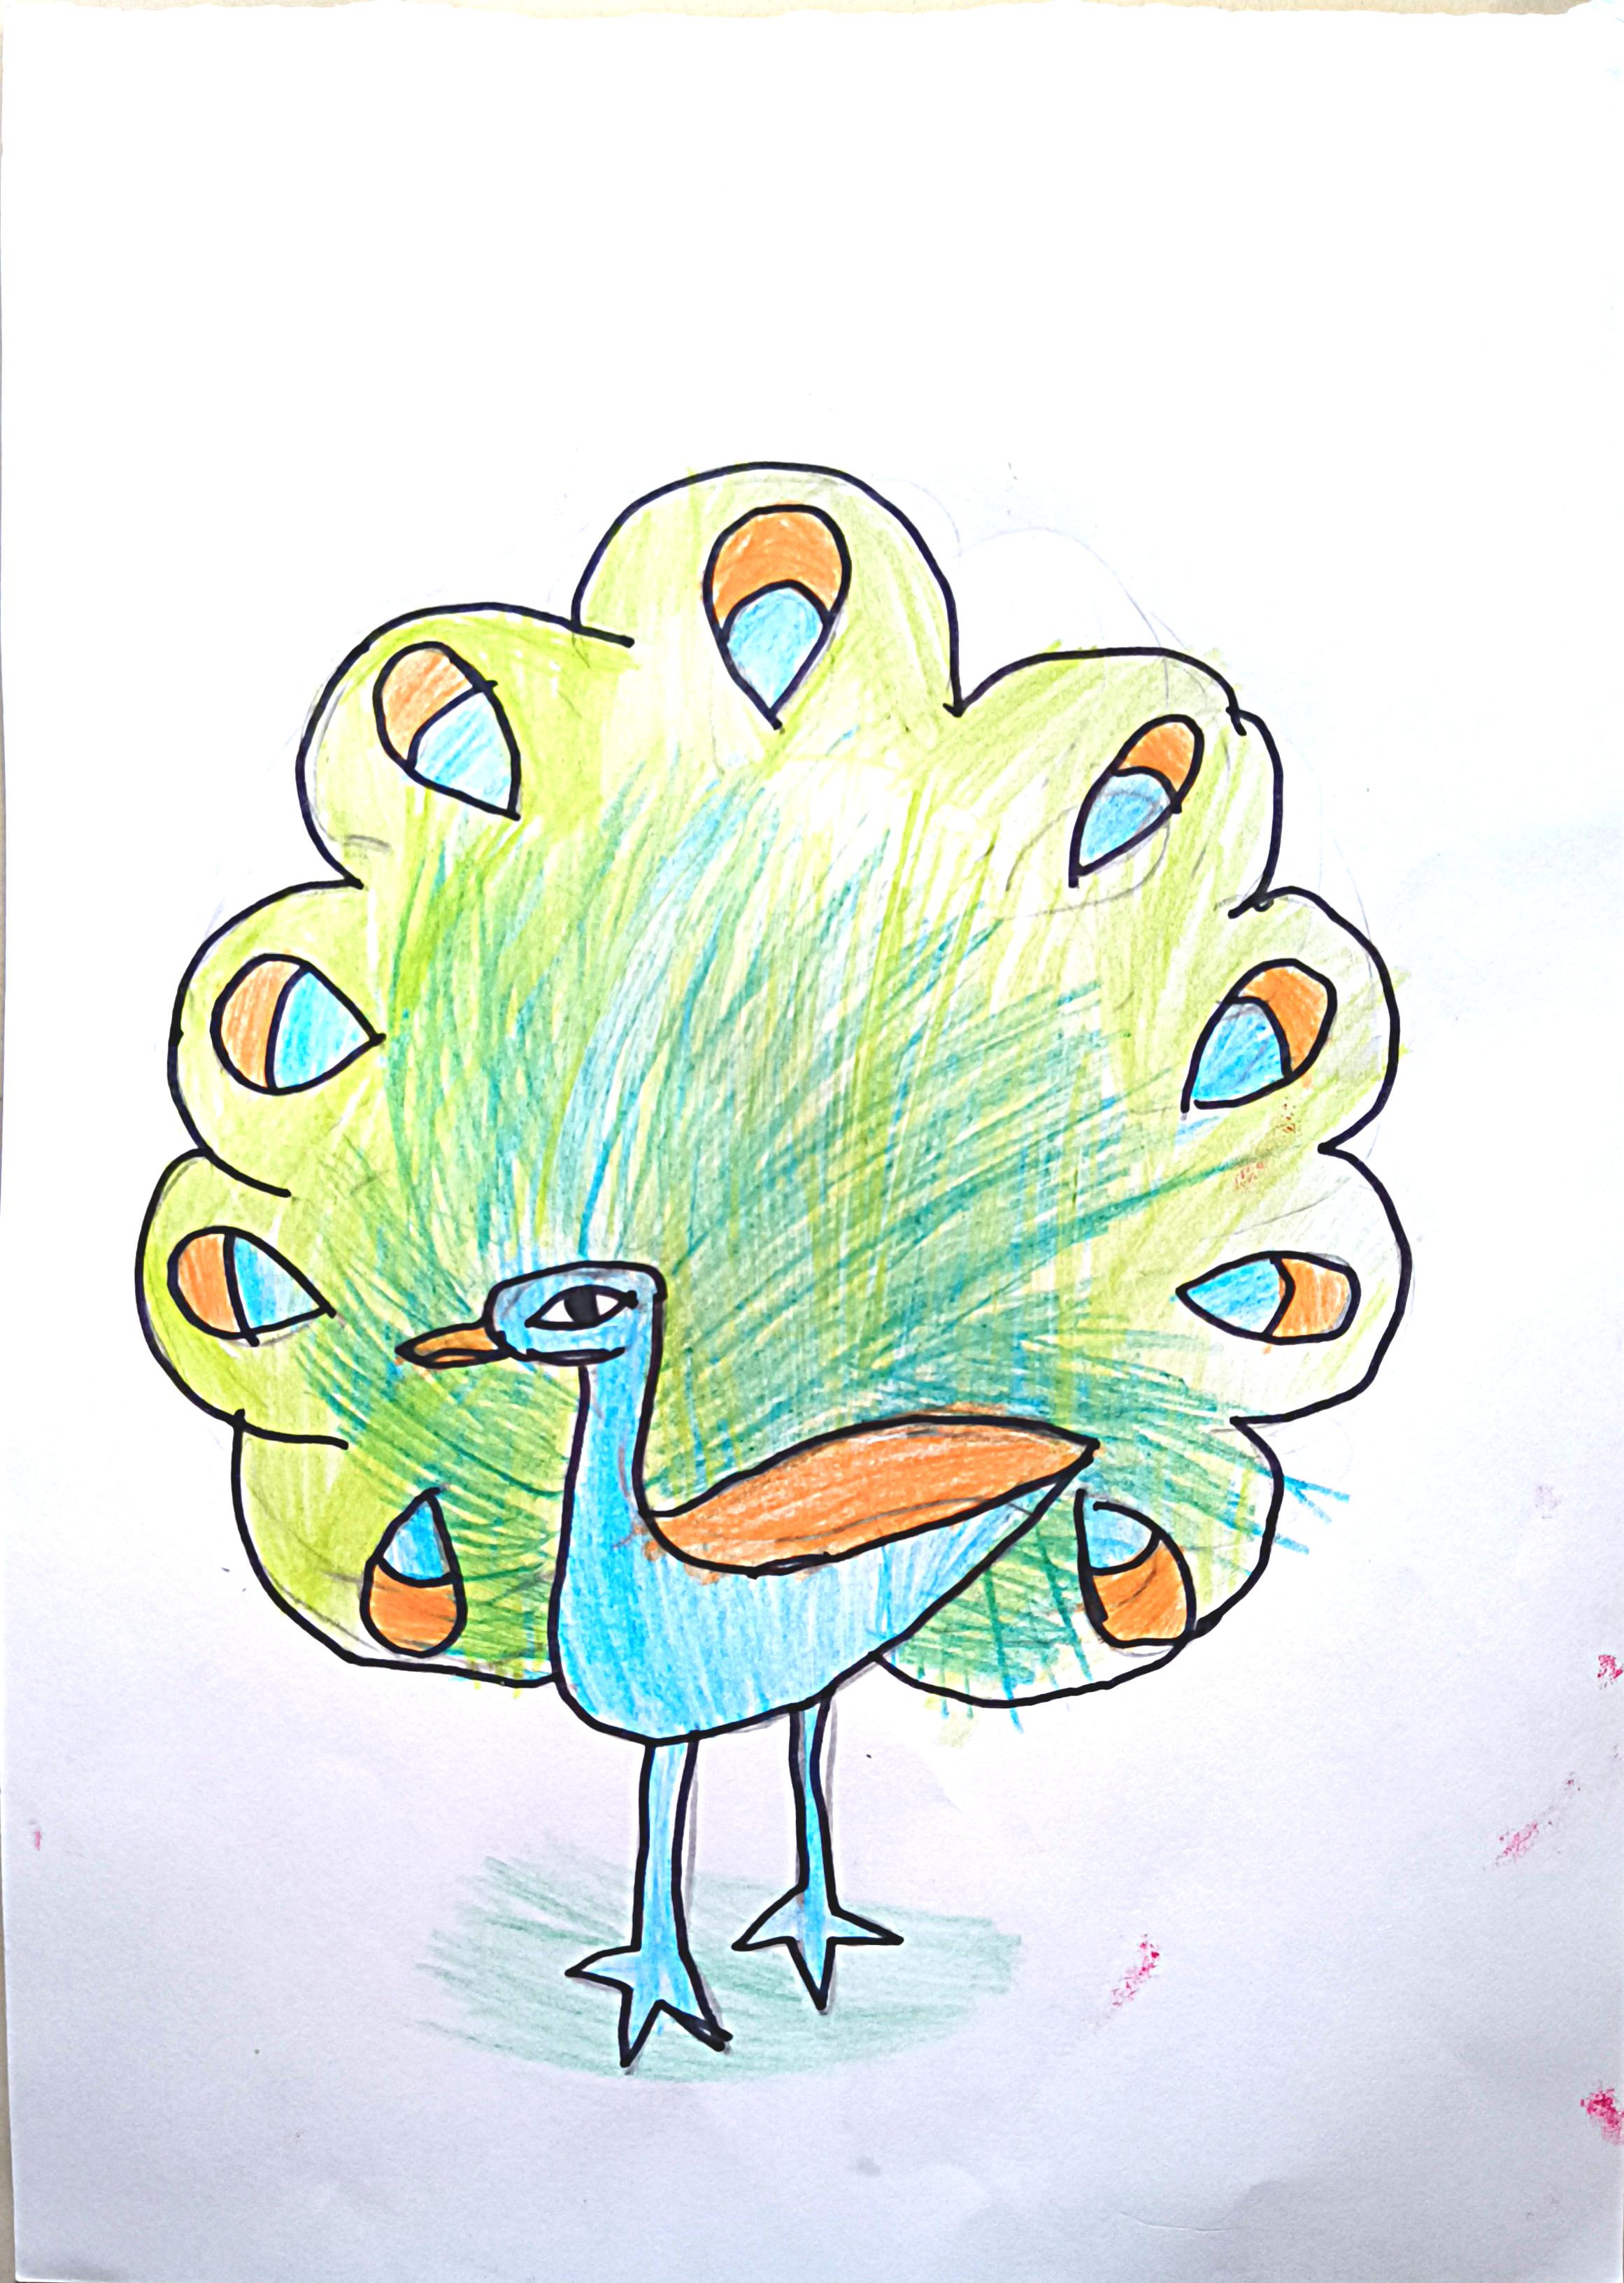 There's a Dragon in my Art Room: Peacocks with shimmer and bling - grade 2